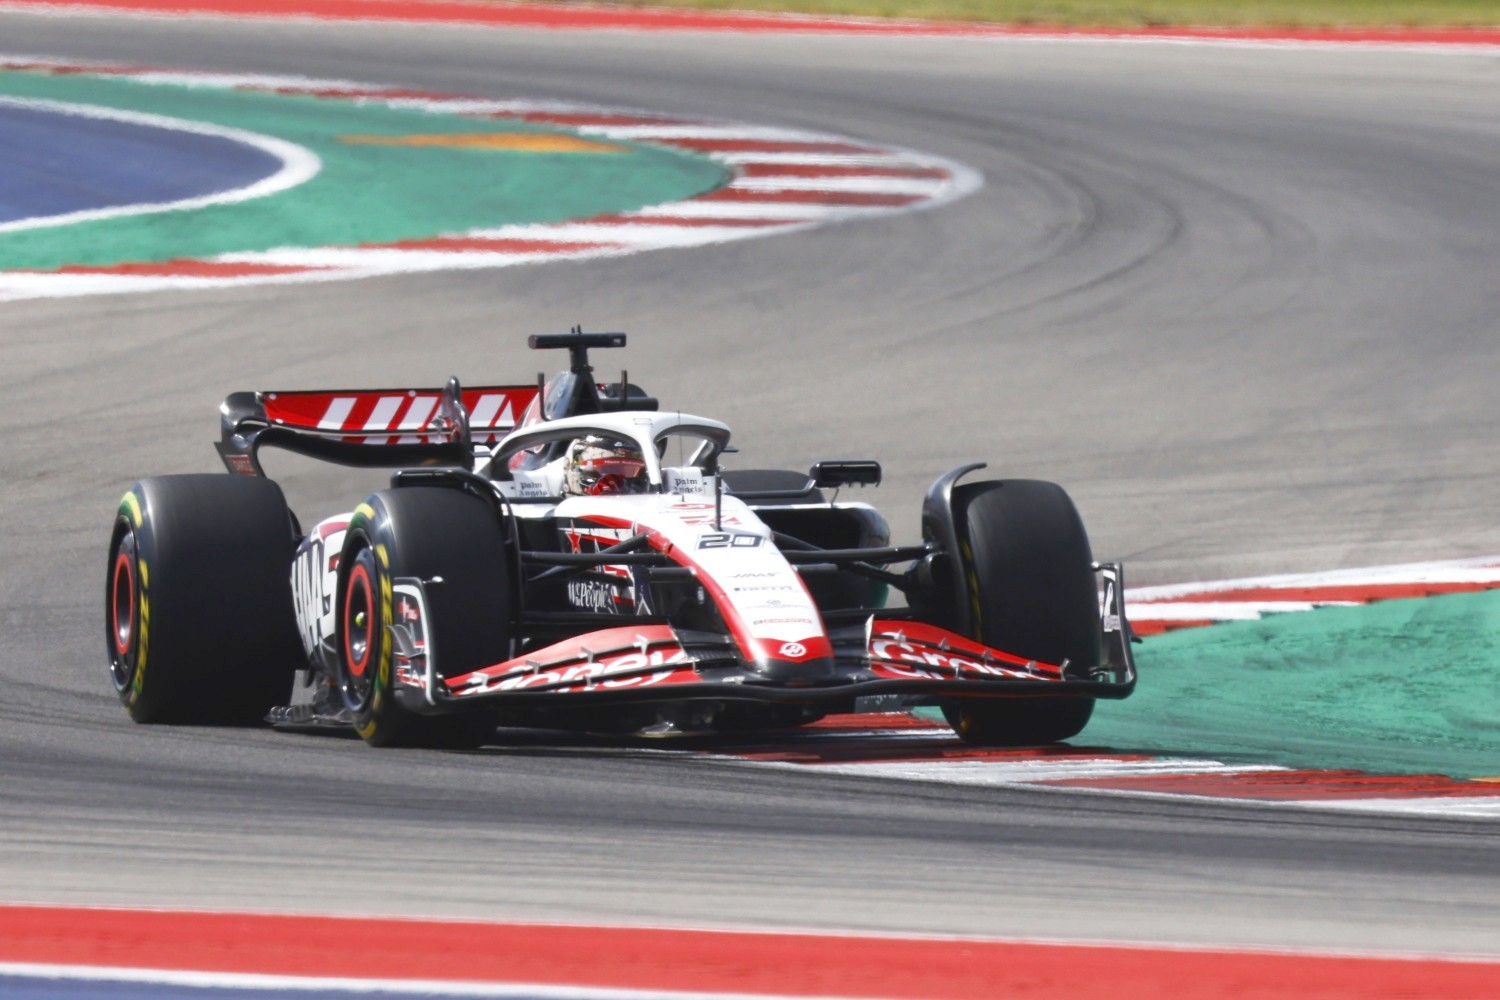 CIRCUIT OF THE AMERICAS, UNITED STATES OF AMERICA - OCTOBER 21: Kevin Magnussen, Haas VF-23 during the United States GP at Circuit of the Americas on Saturday October 21, 2023 in Austin, United States of America. (Photo by Sam Bloxham / LAT Images)